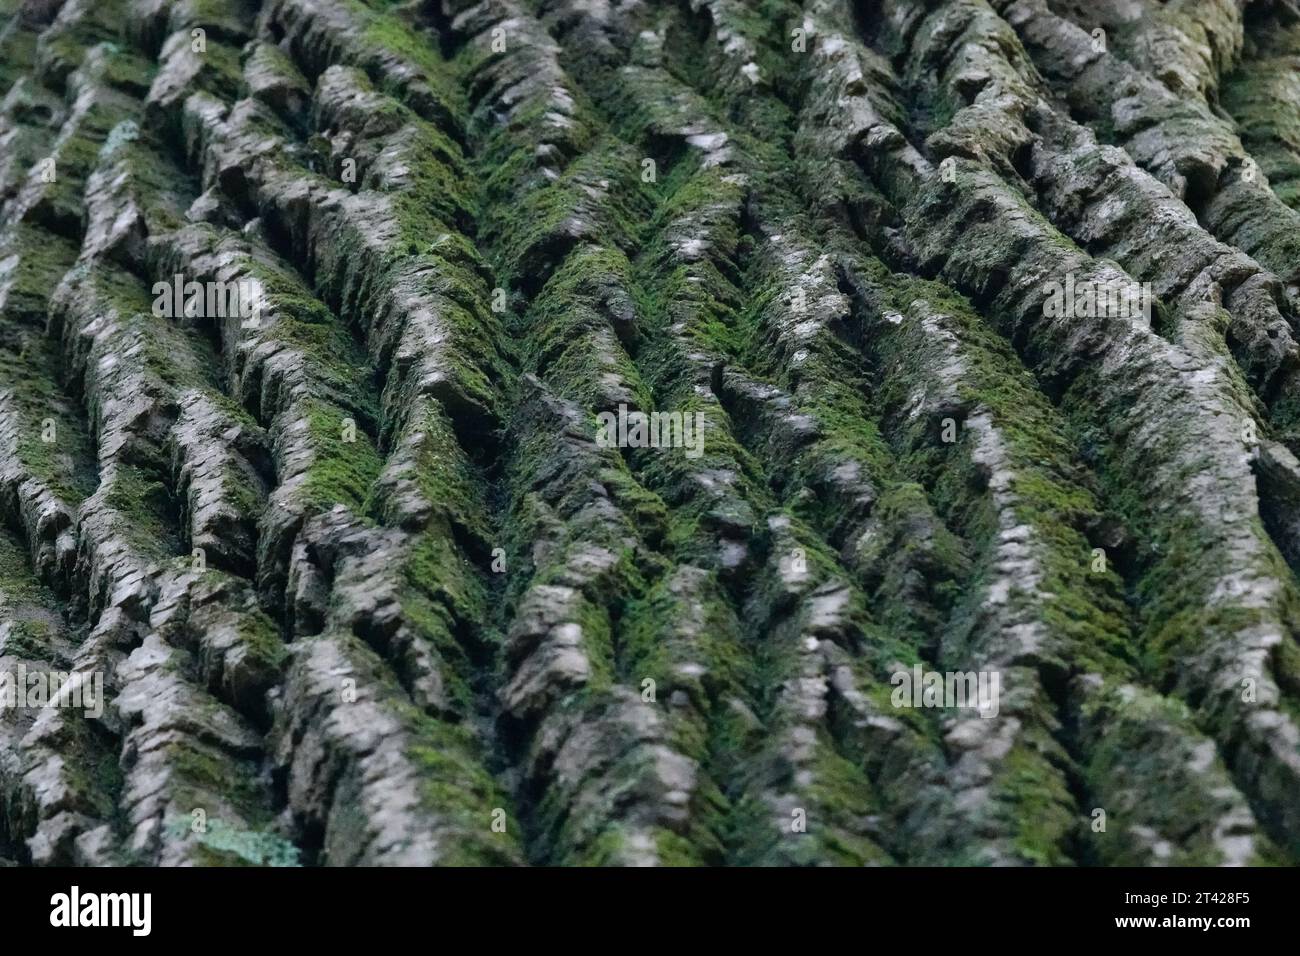 a close-up of the ridges in tree bark with dark green moss growing on the ridges, so that they look like mountains. Stock Photo